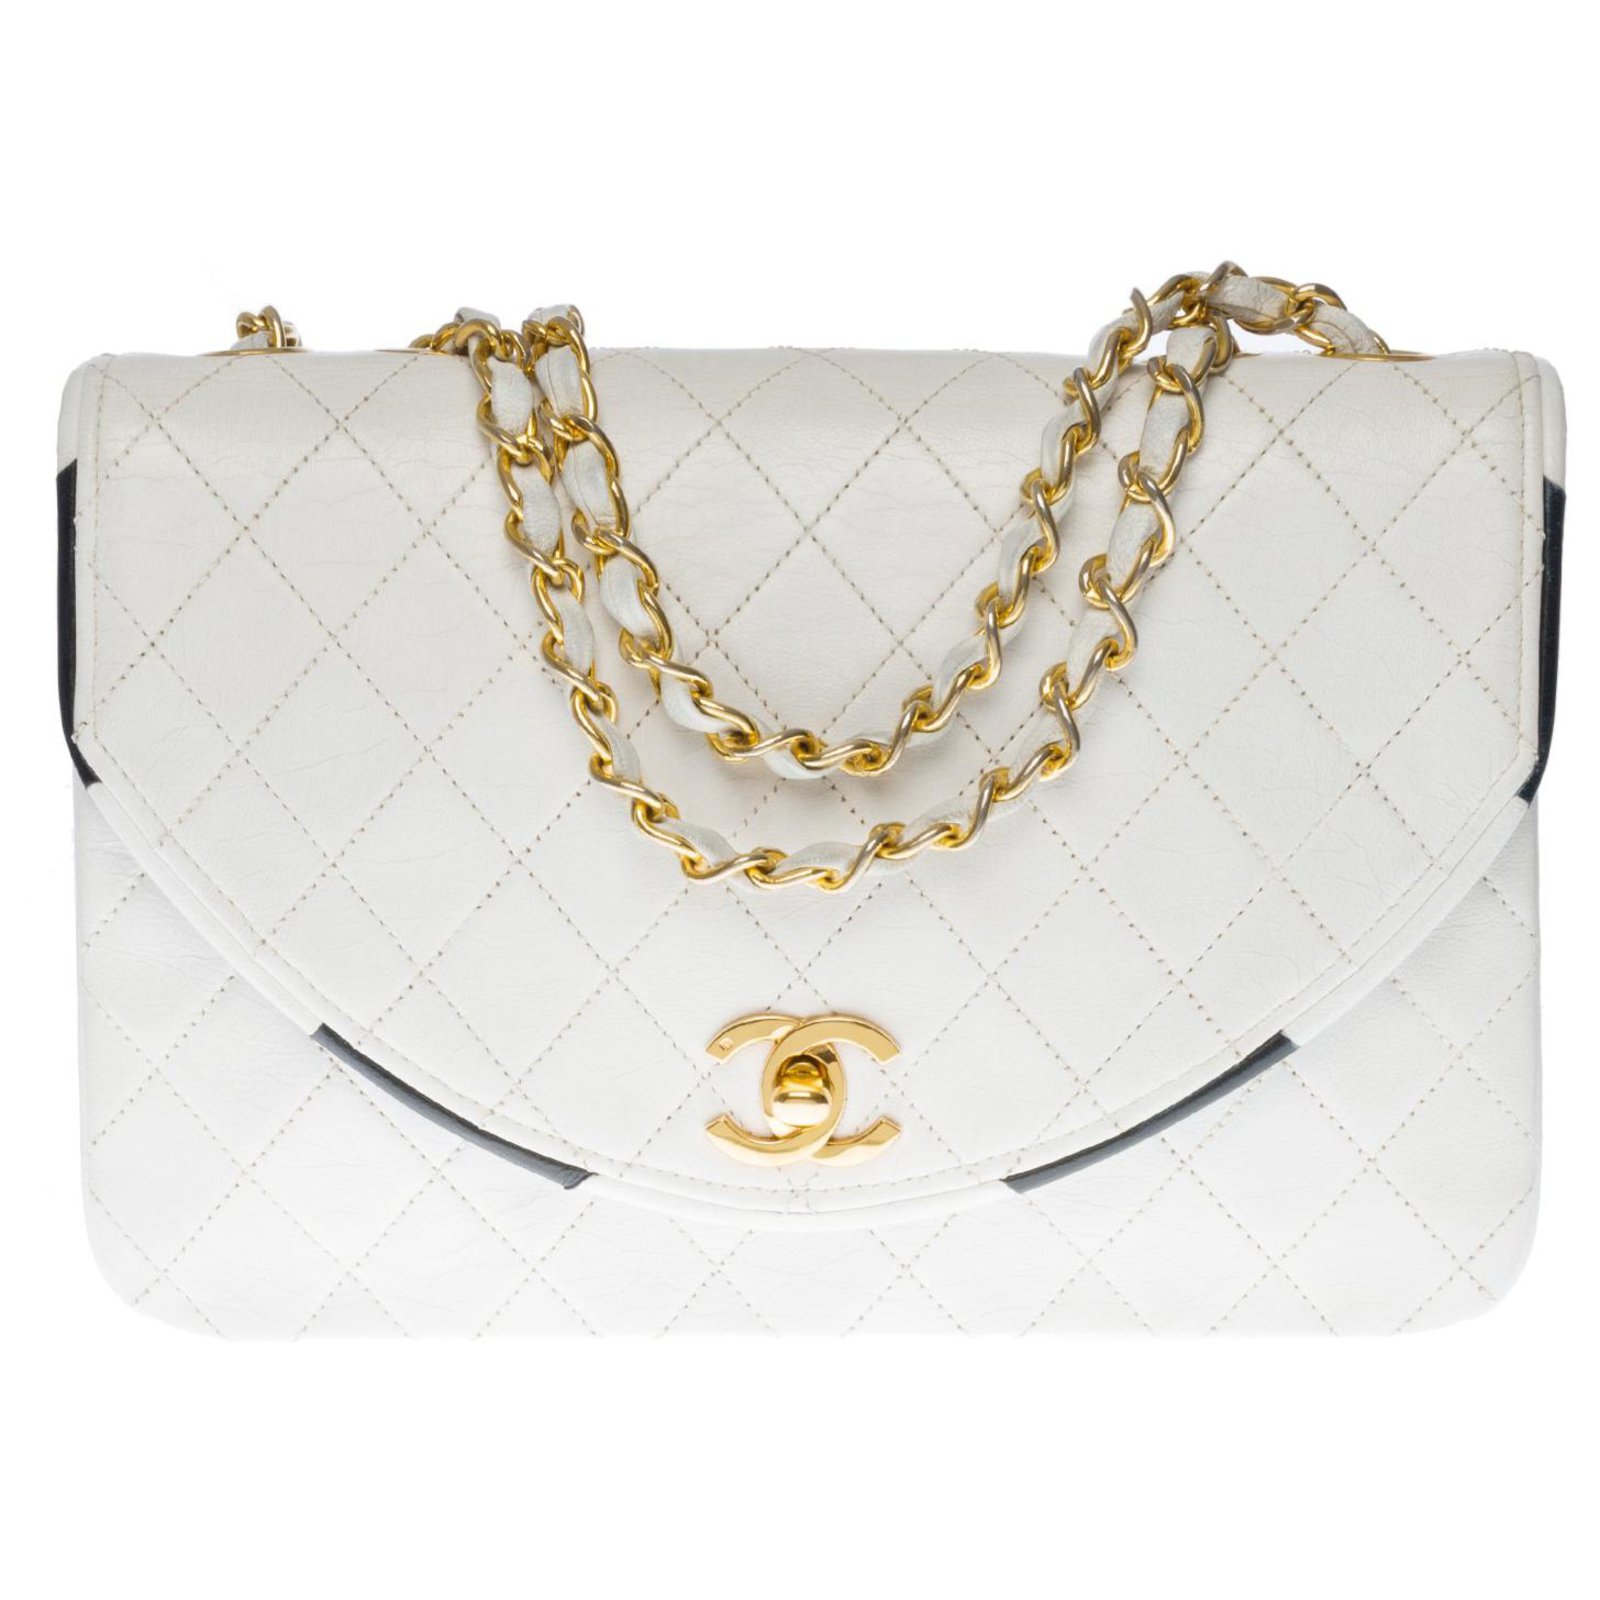 Timeless Lovely Classic Chanel Bag 23two-tone cm with flap in